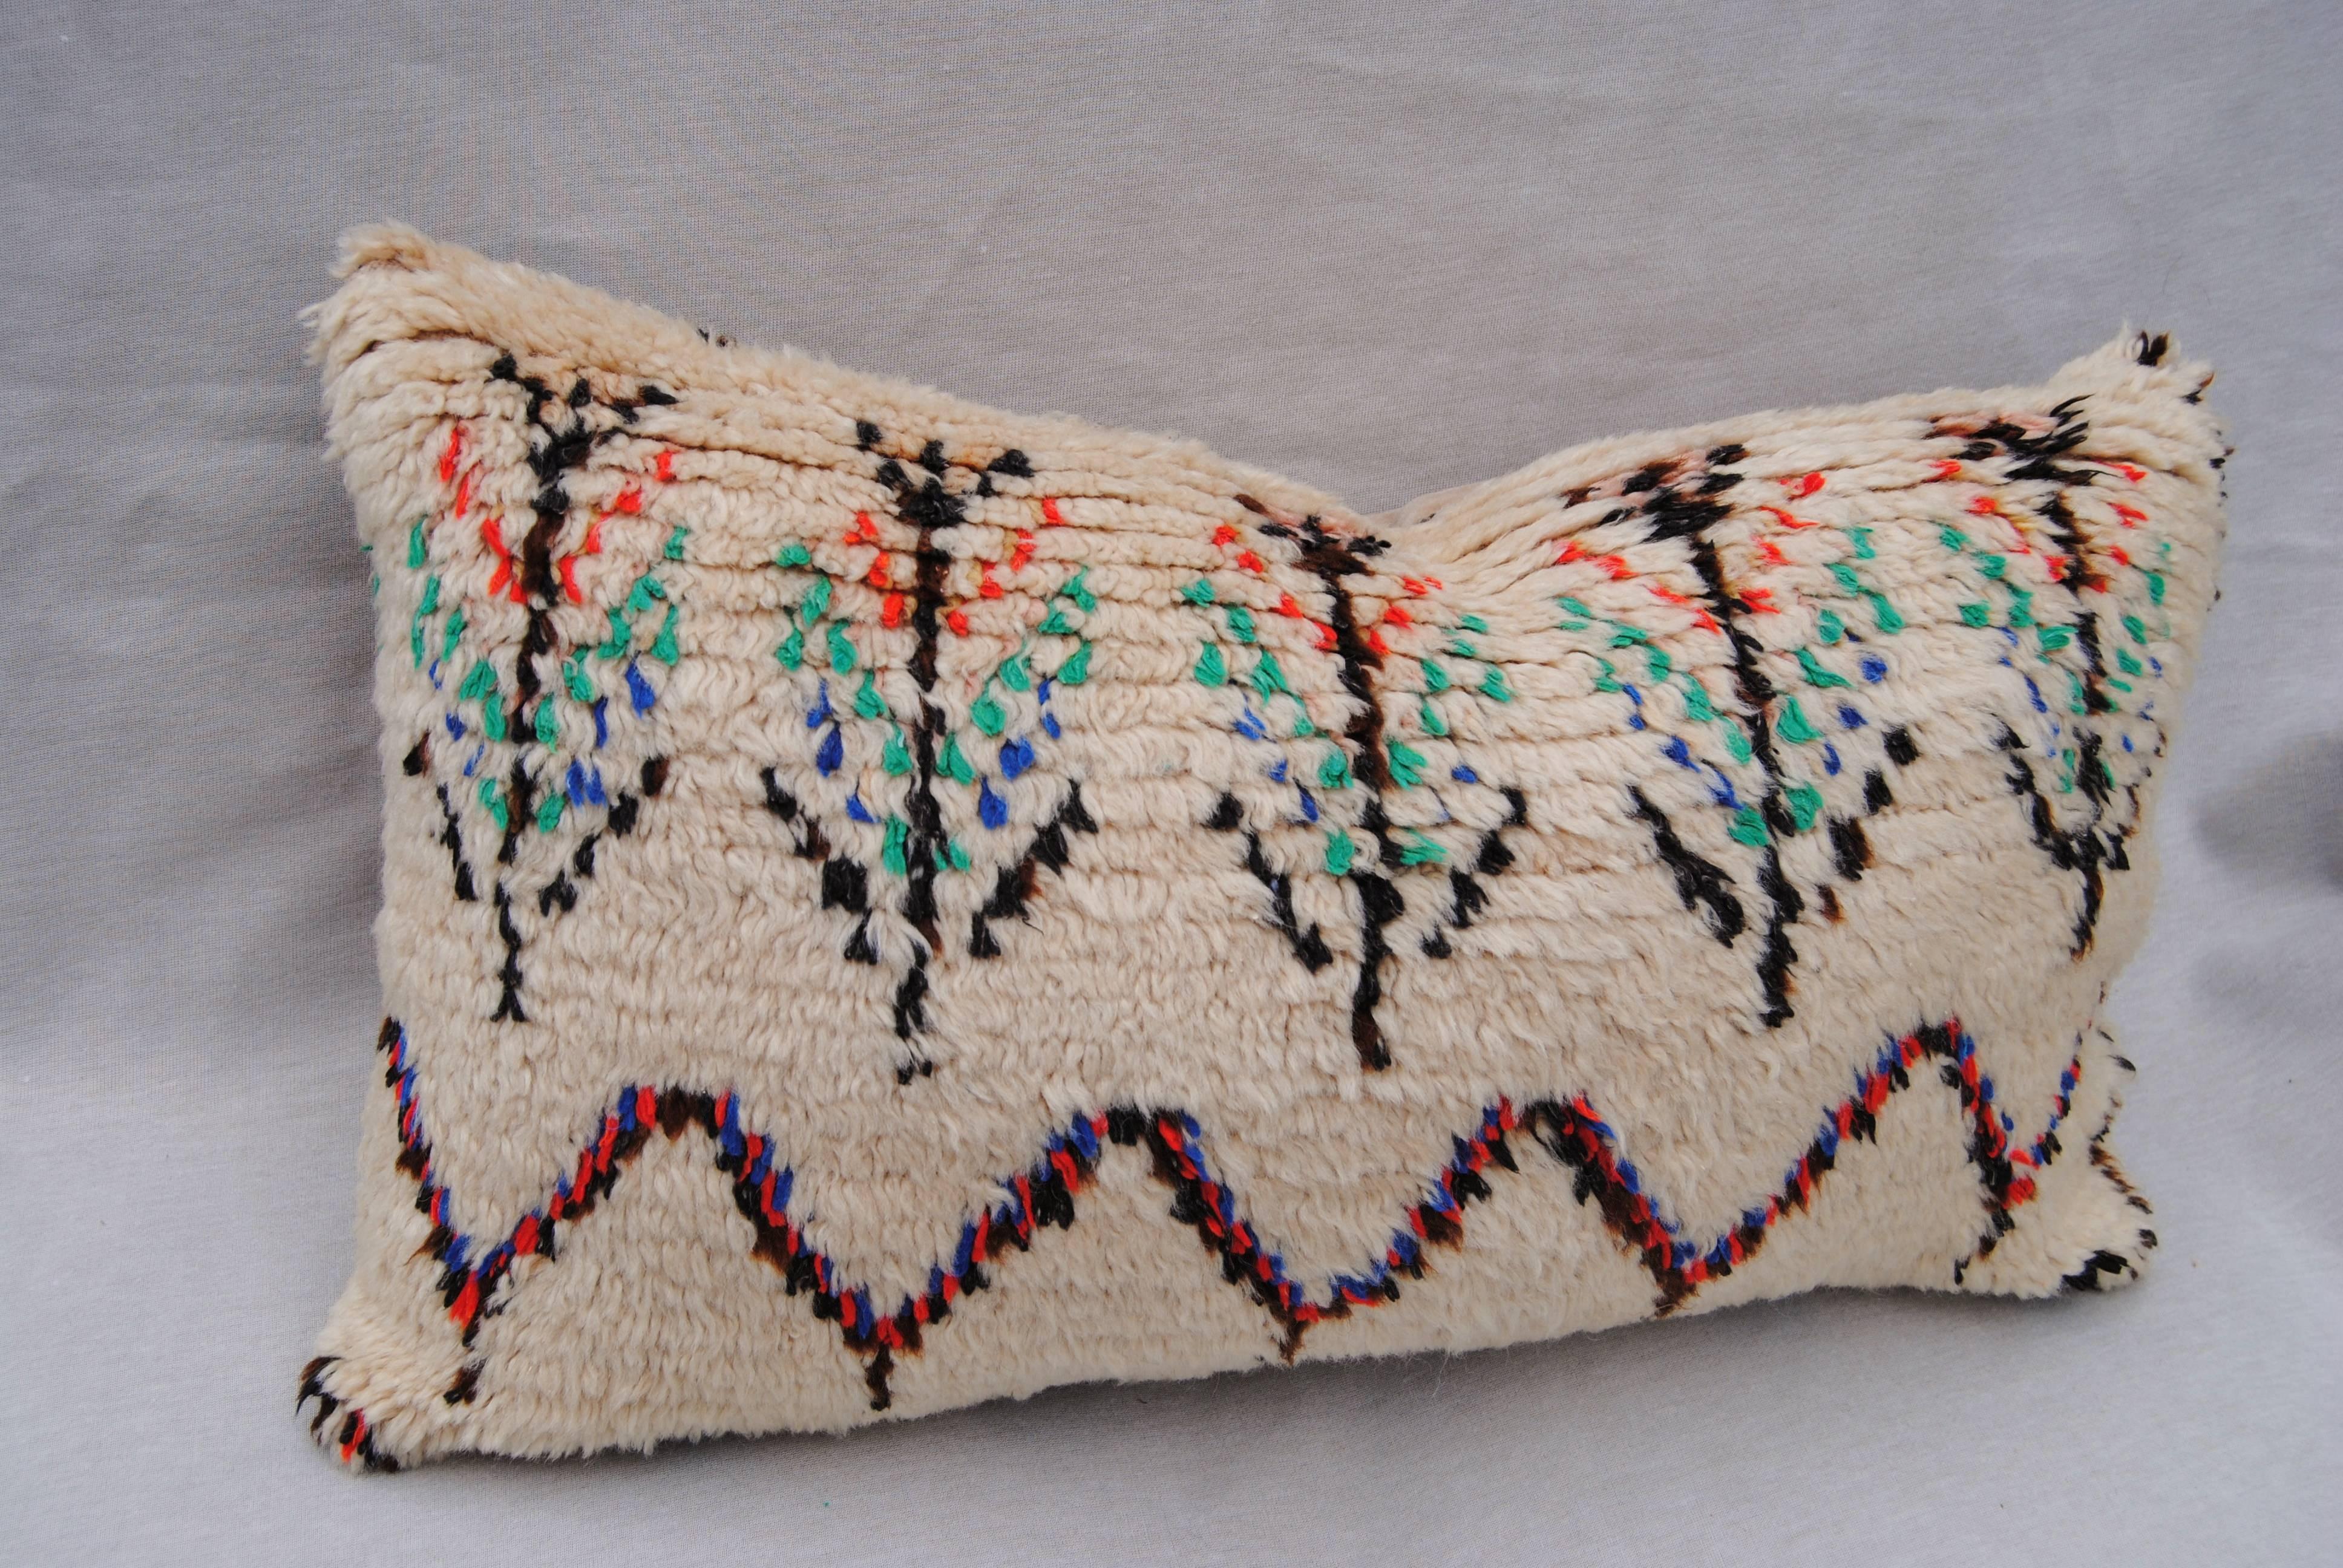 Custom pillow cut from a vintage hand-loomed wool Azilal Moroccan rug from the Atlas mountains. The wool textile is very soft and lustrous with all natural dyes. Pillow is backed in a cream mohair, filled with an all down insert and hand-sewn